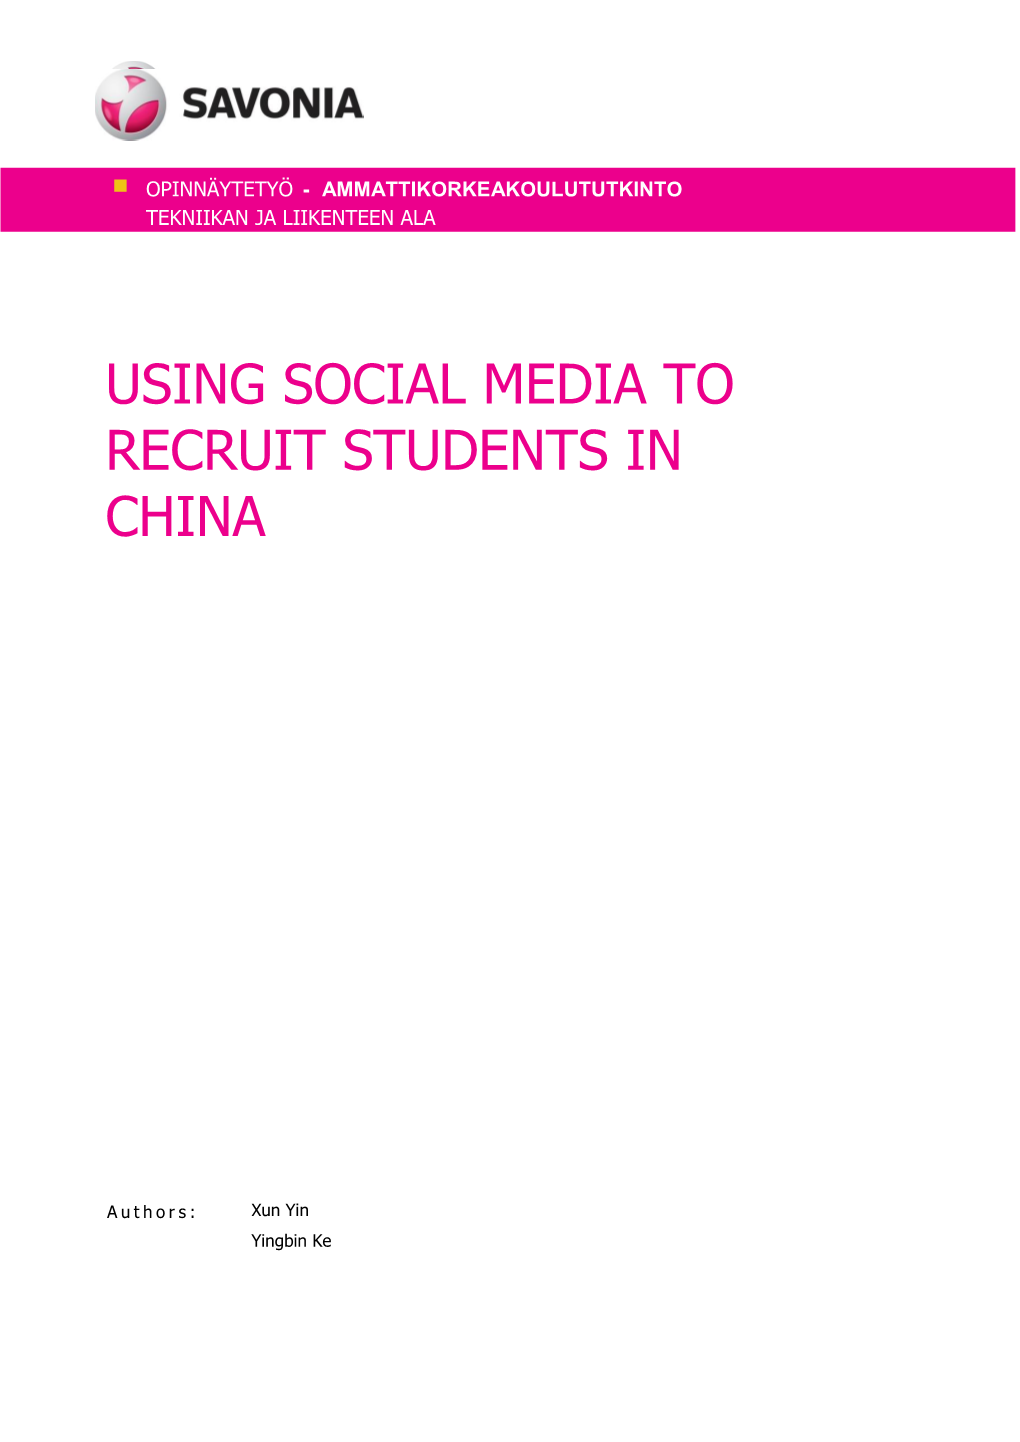 USING SOCIAL MEDIA to RECRUIT STUDENTS in CHINA Subheading